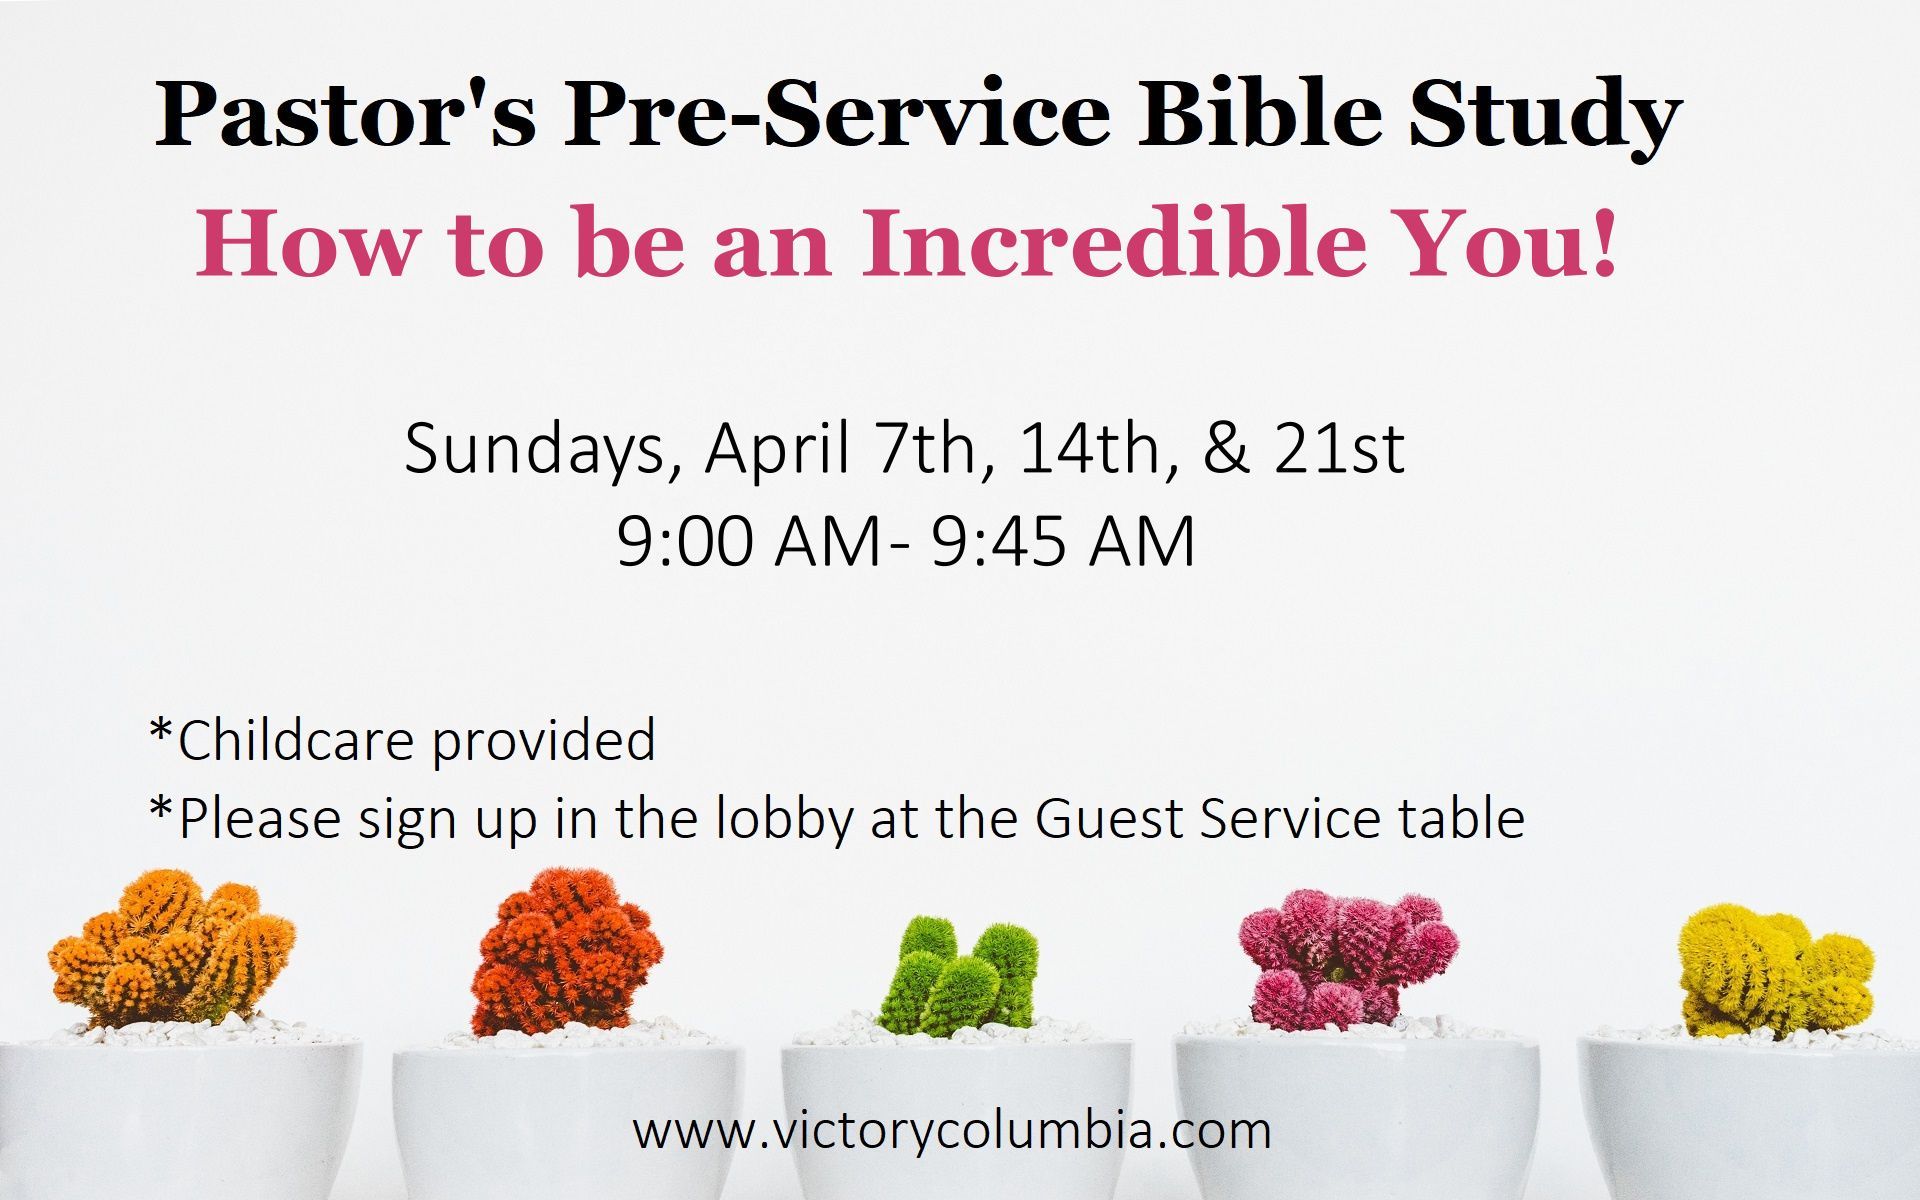 Check Out Our Vacation Bible School Events at Victory Church in Columbia, MO!